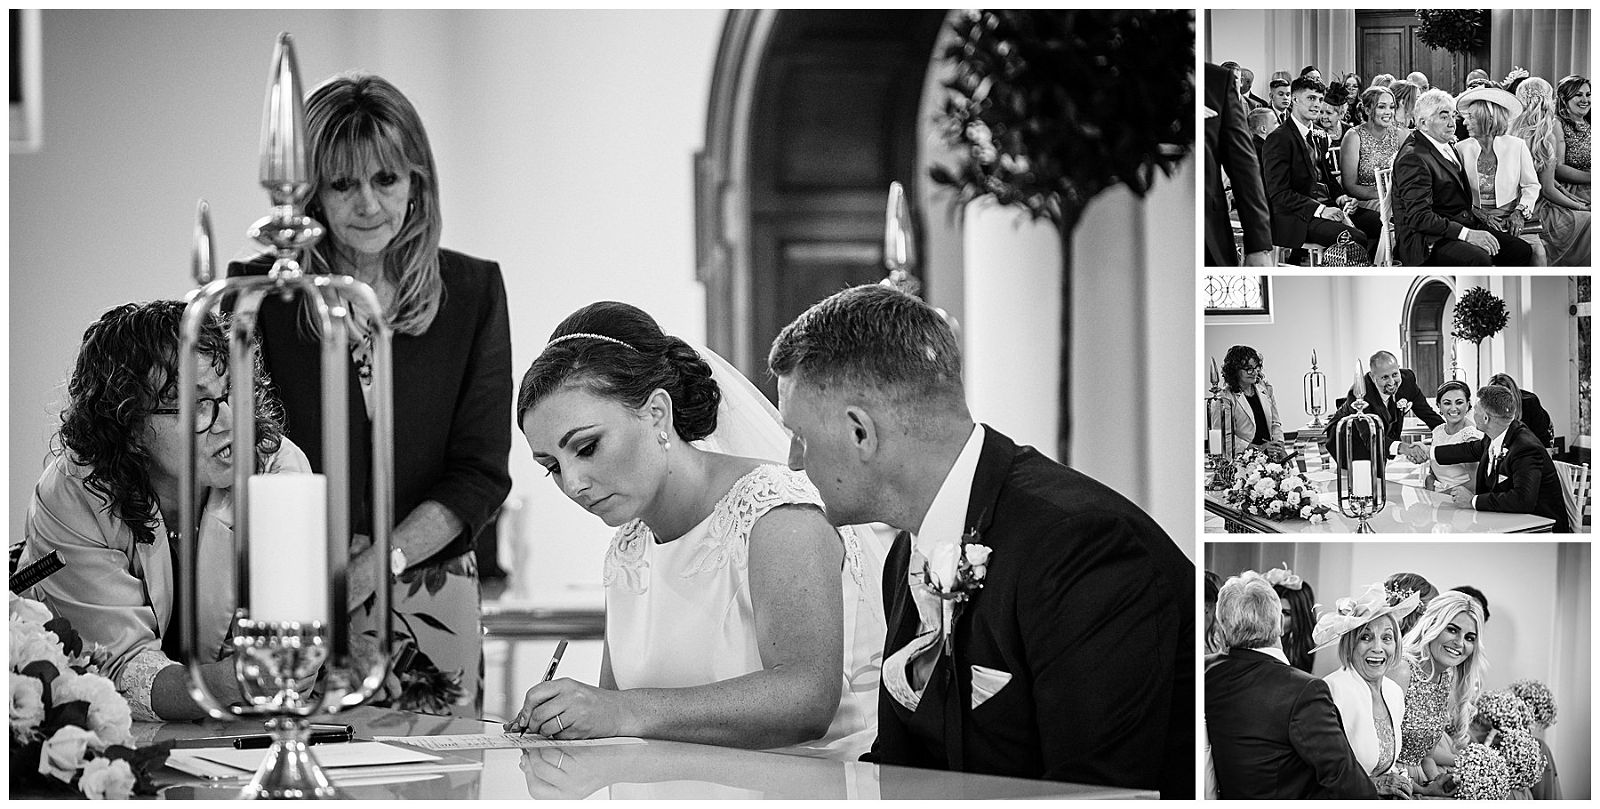 Signing of the register at Hawkstone Hall in Shrewsbury by Documentary Wedding Photographer Stuart James